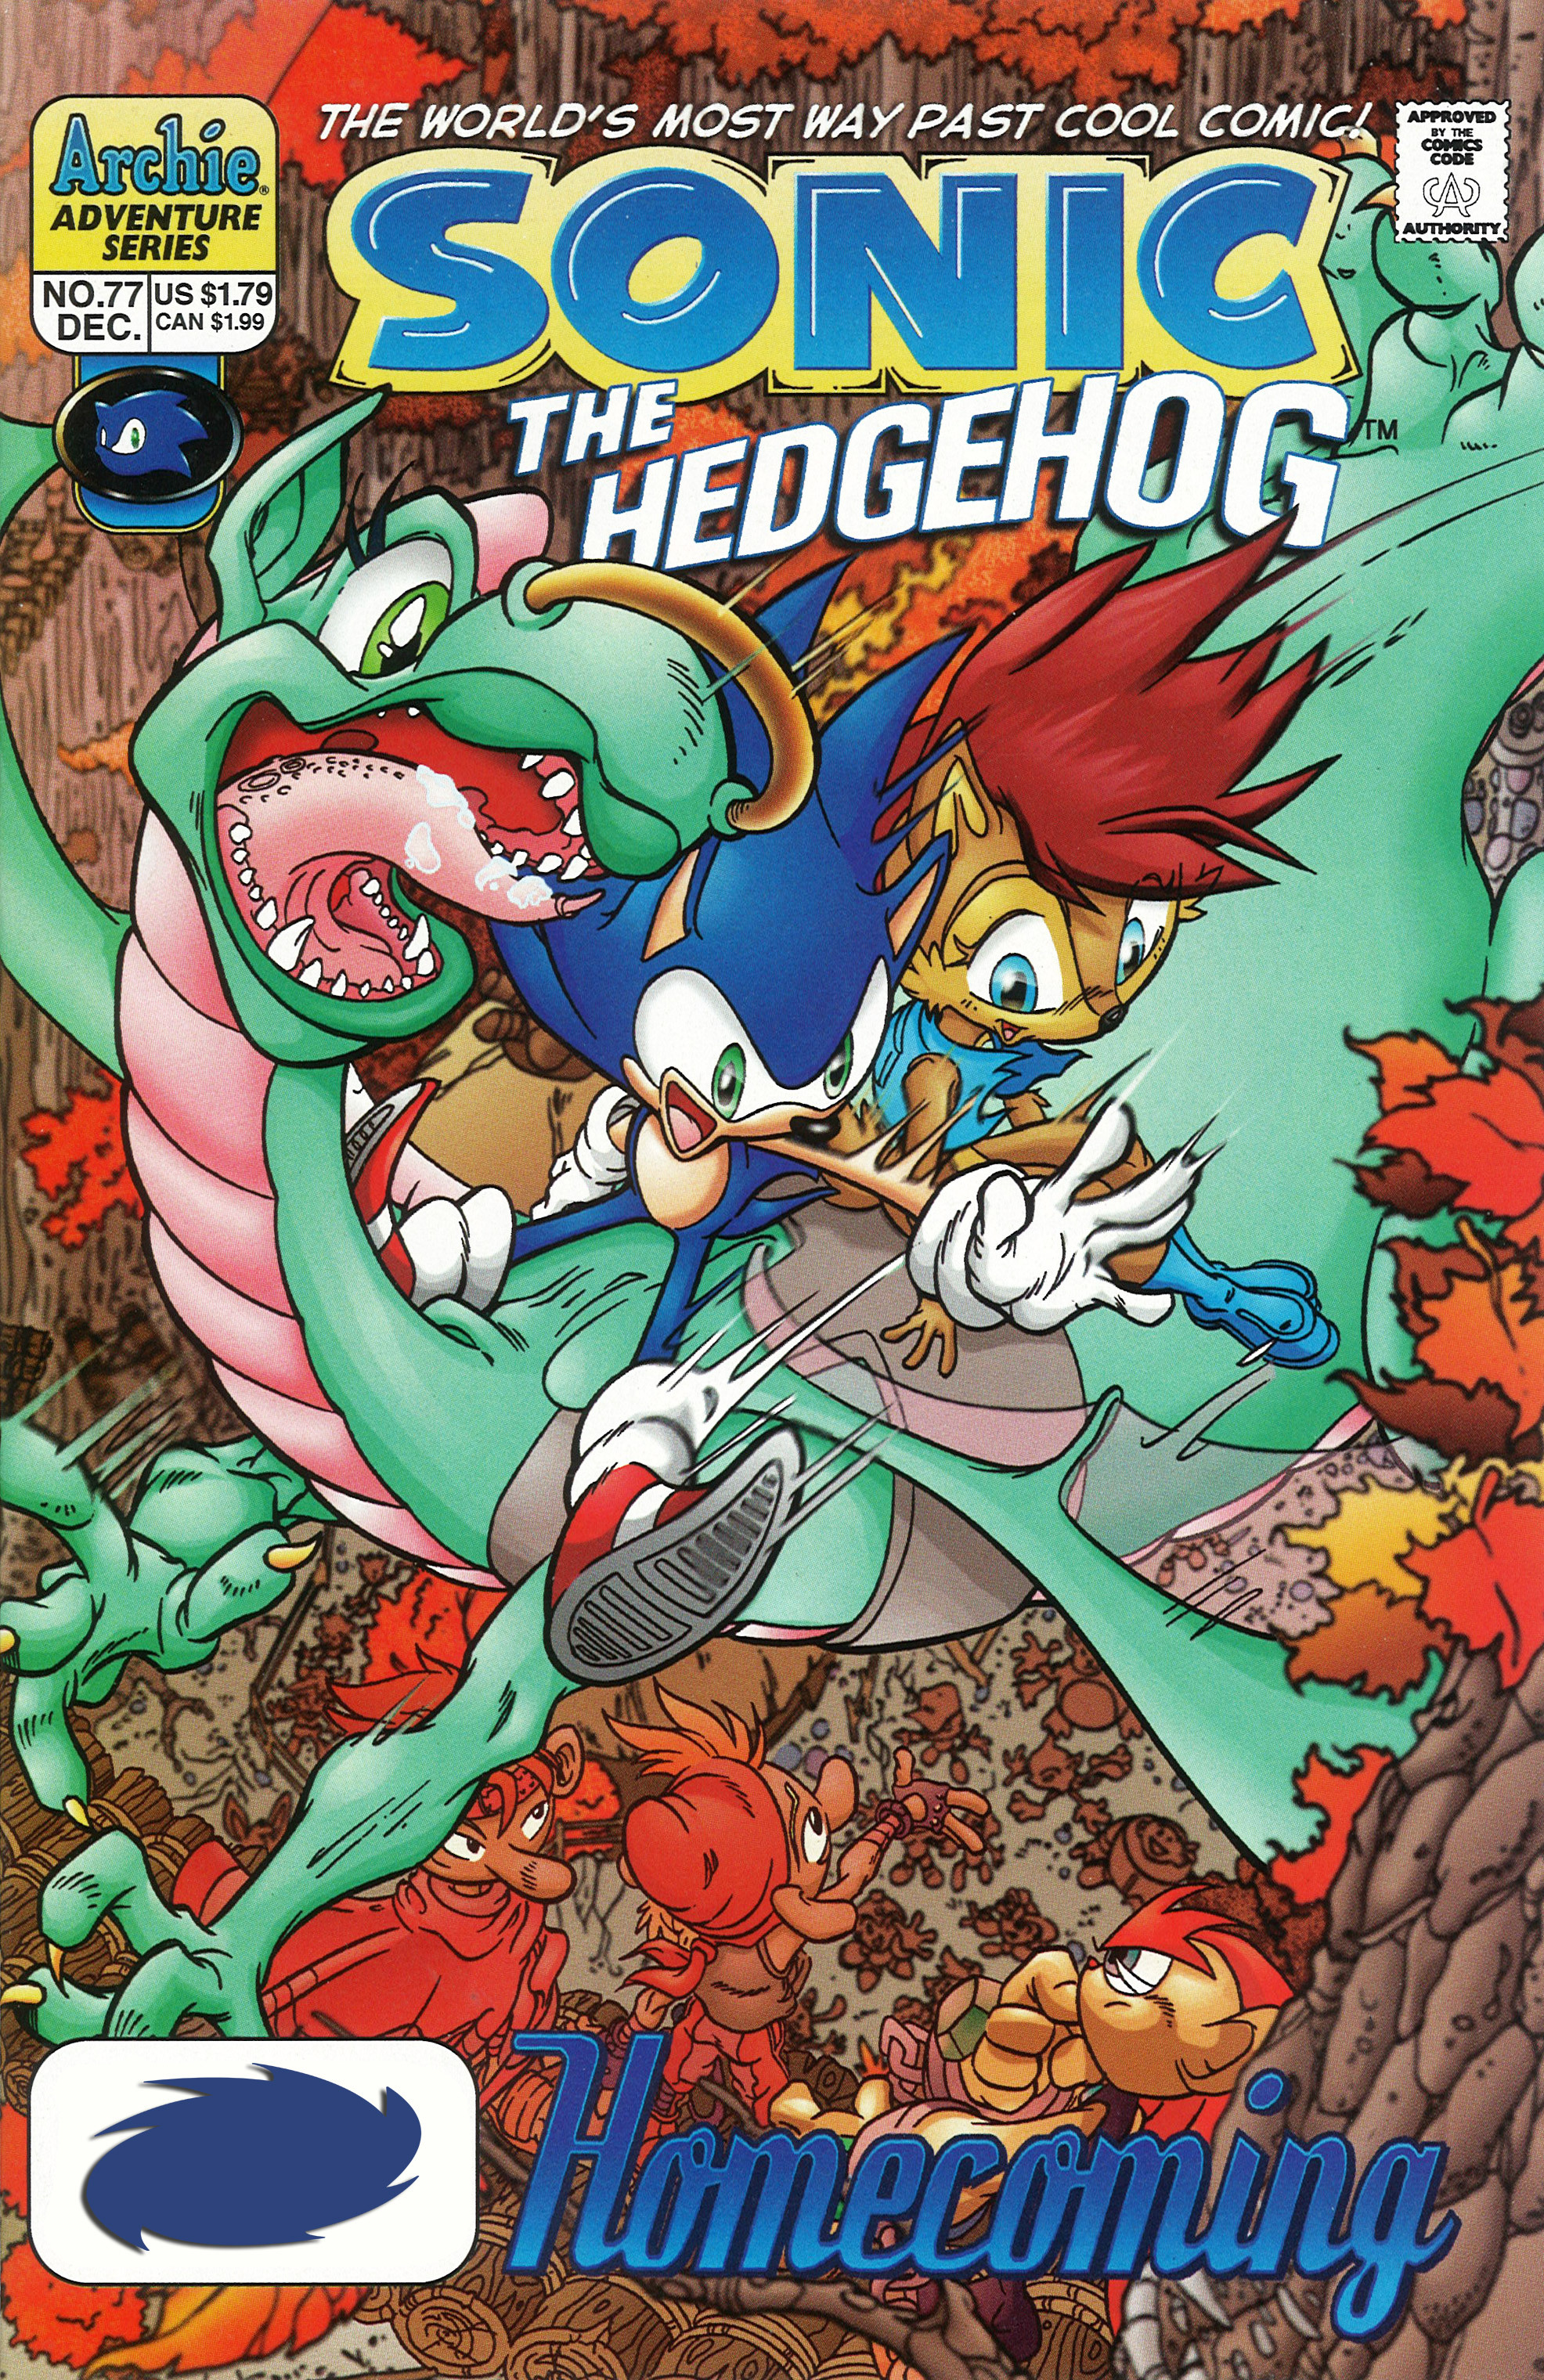 Archie Sonic Universe Issue 8 | Sonic News Network 